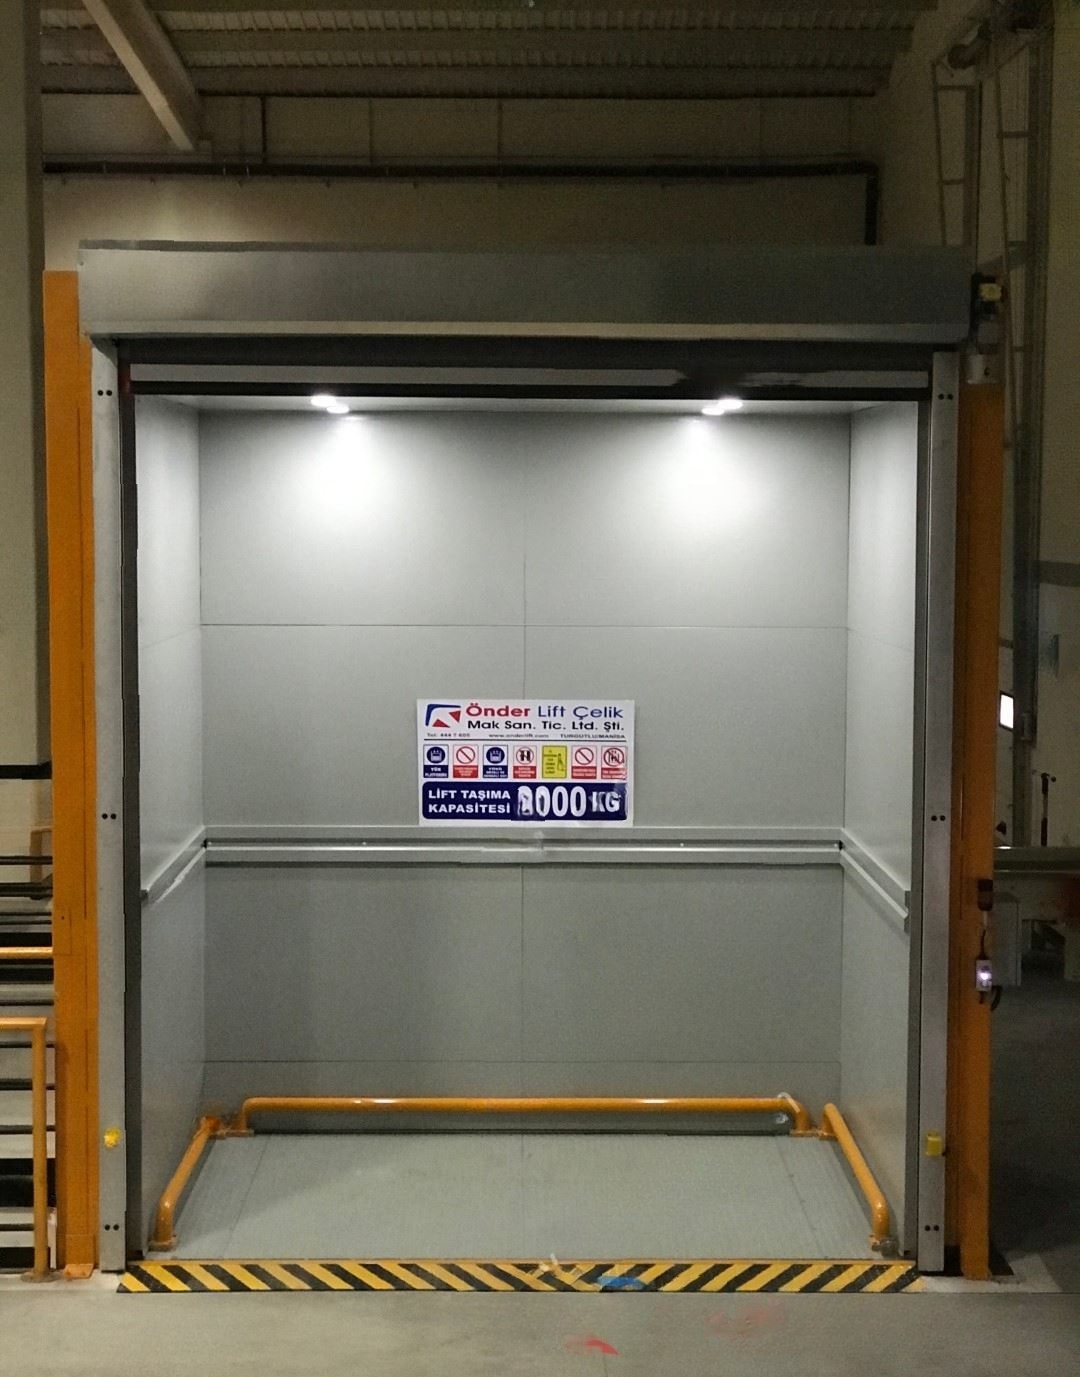 What is Goods Lift / Cargo Lift?